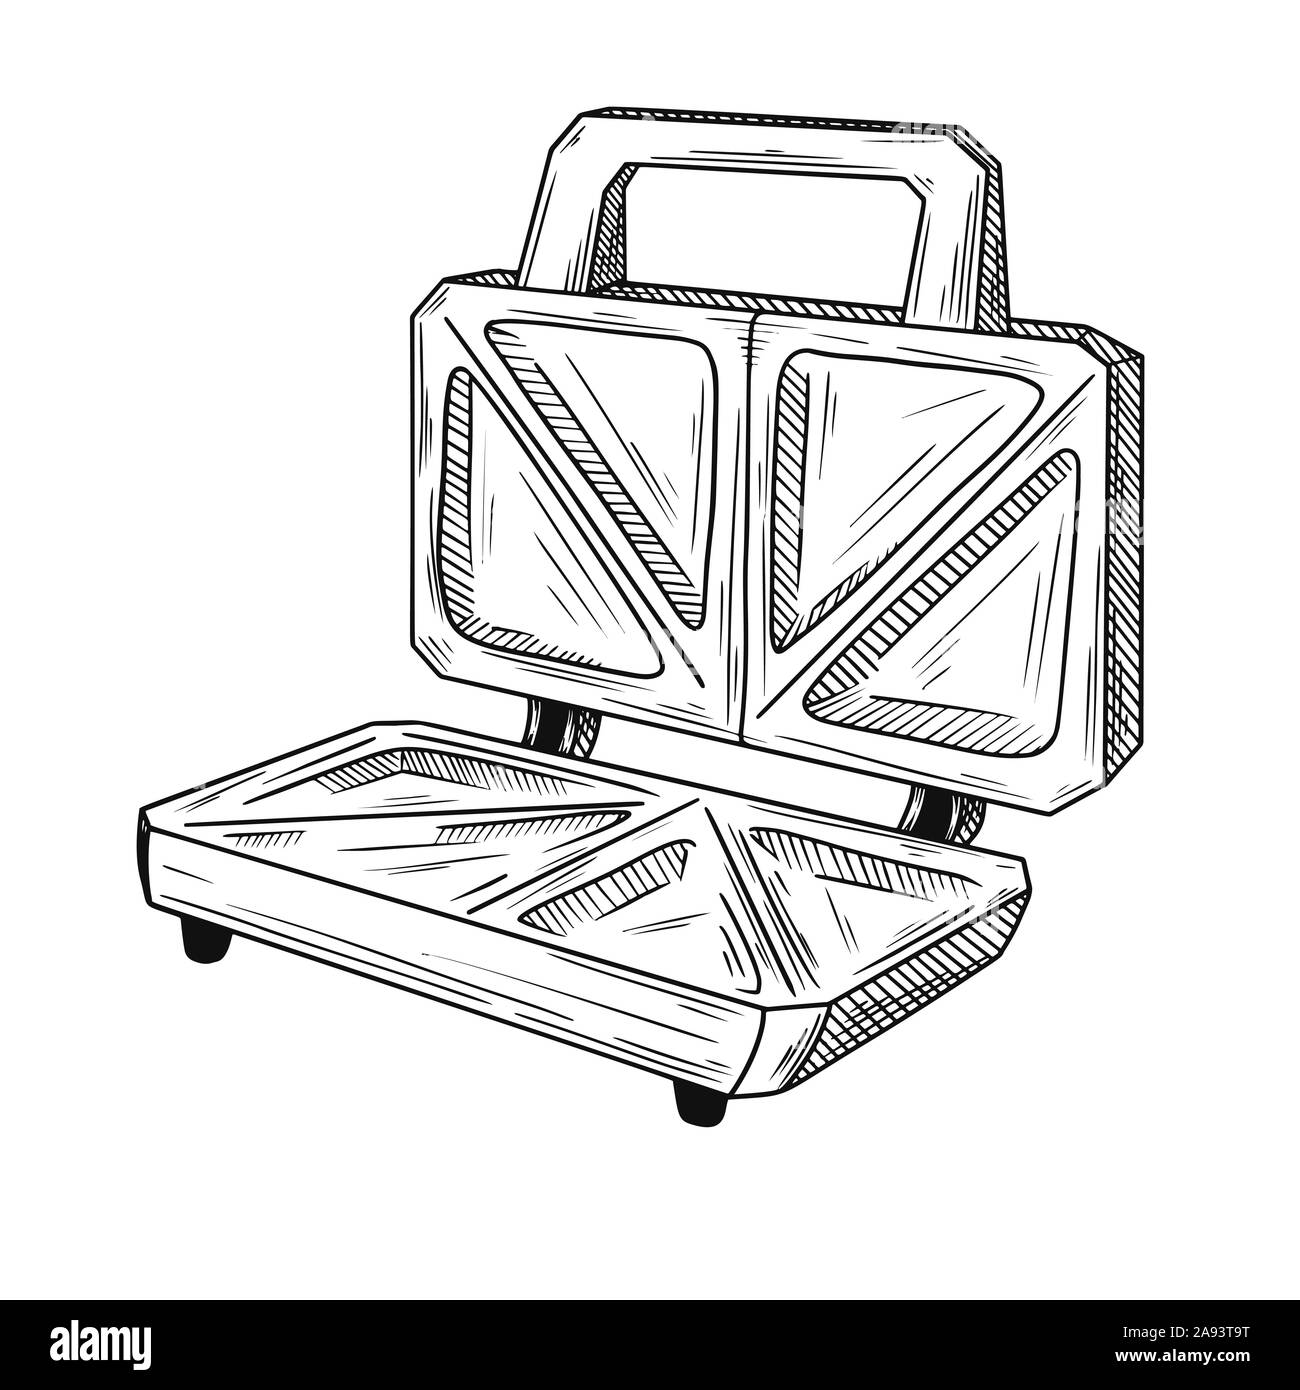 Sketch sandwich toaster on a white background. Vector illustration in sketch style. Stock Vector